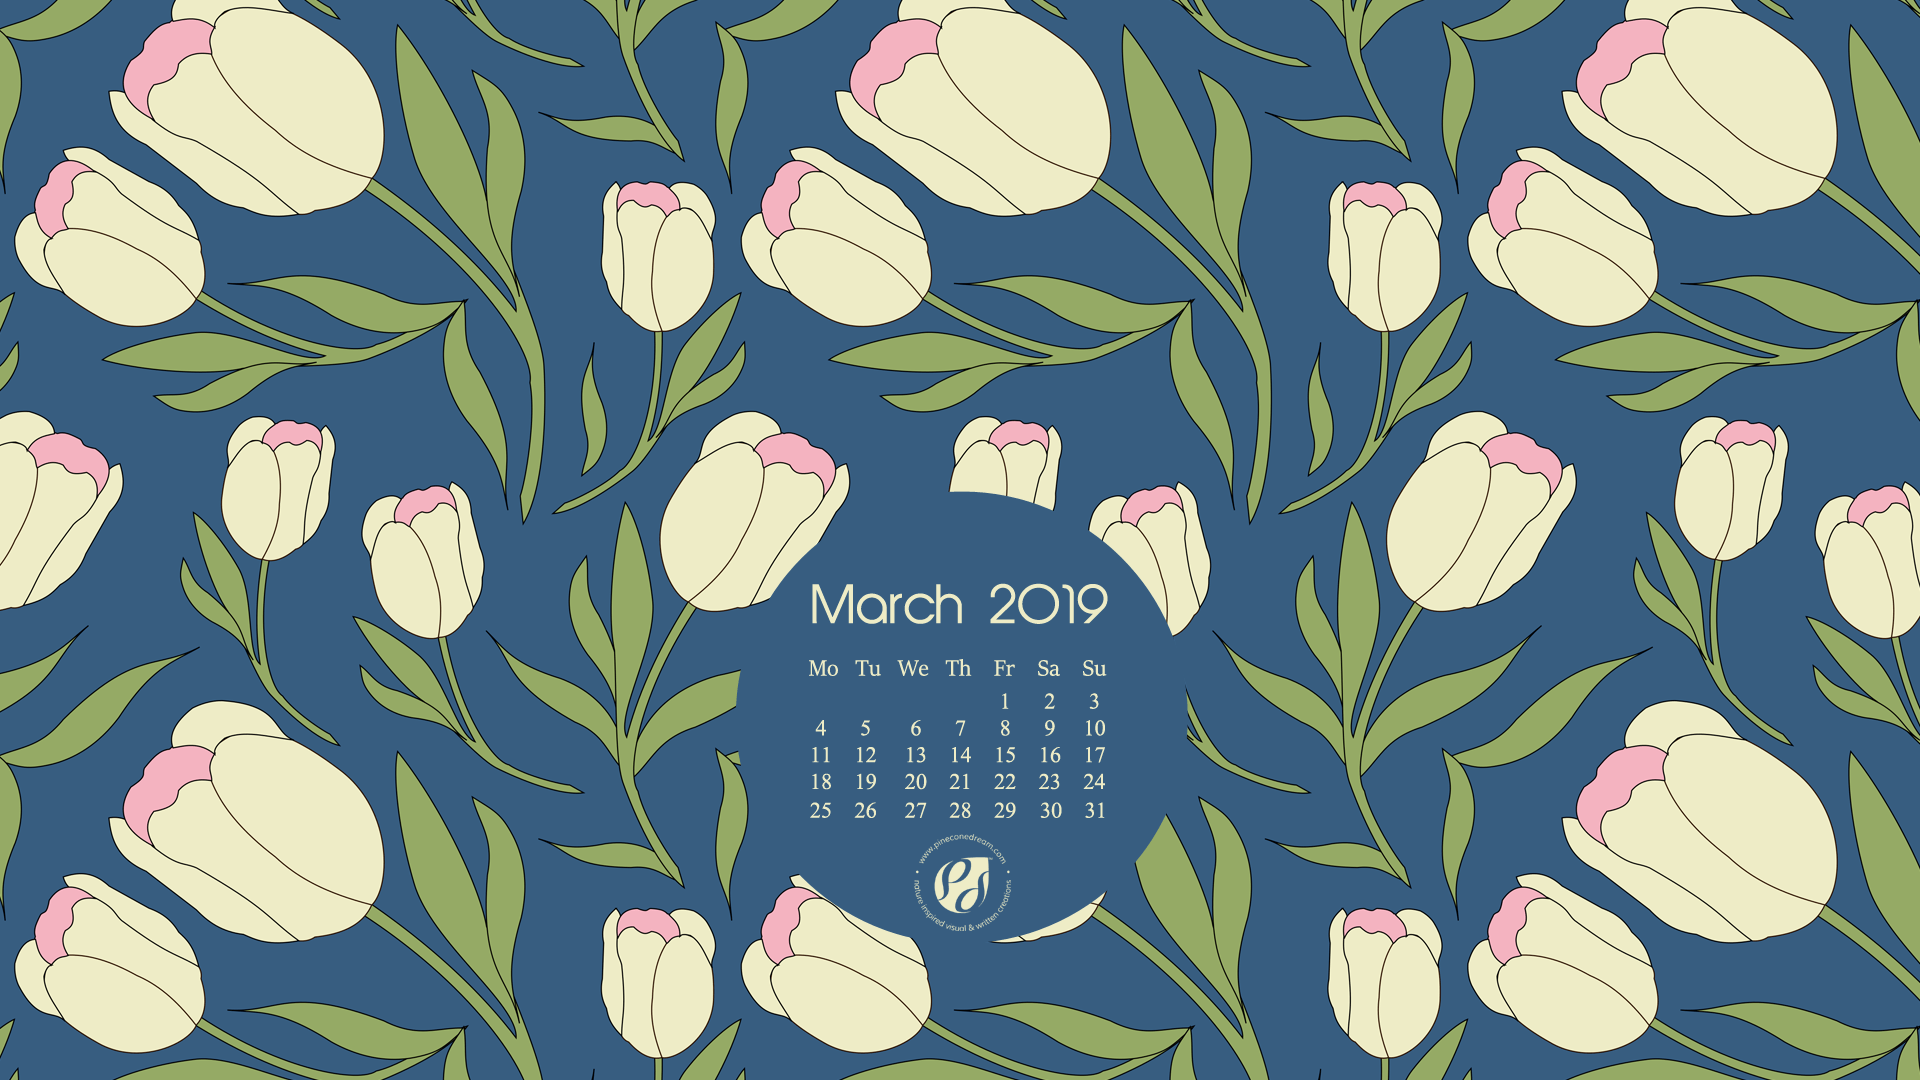 March 2019 free calendar wallpaper & printable planner, illustrated